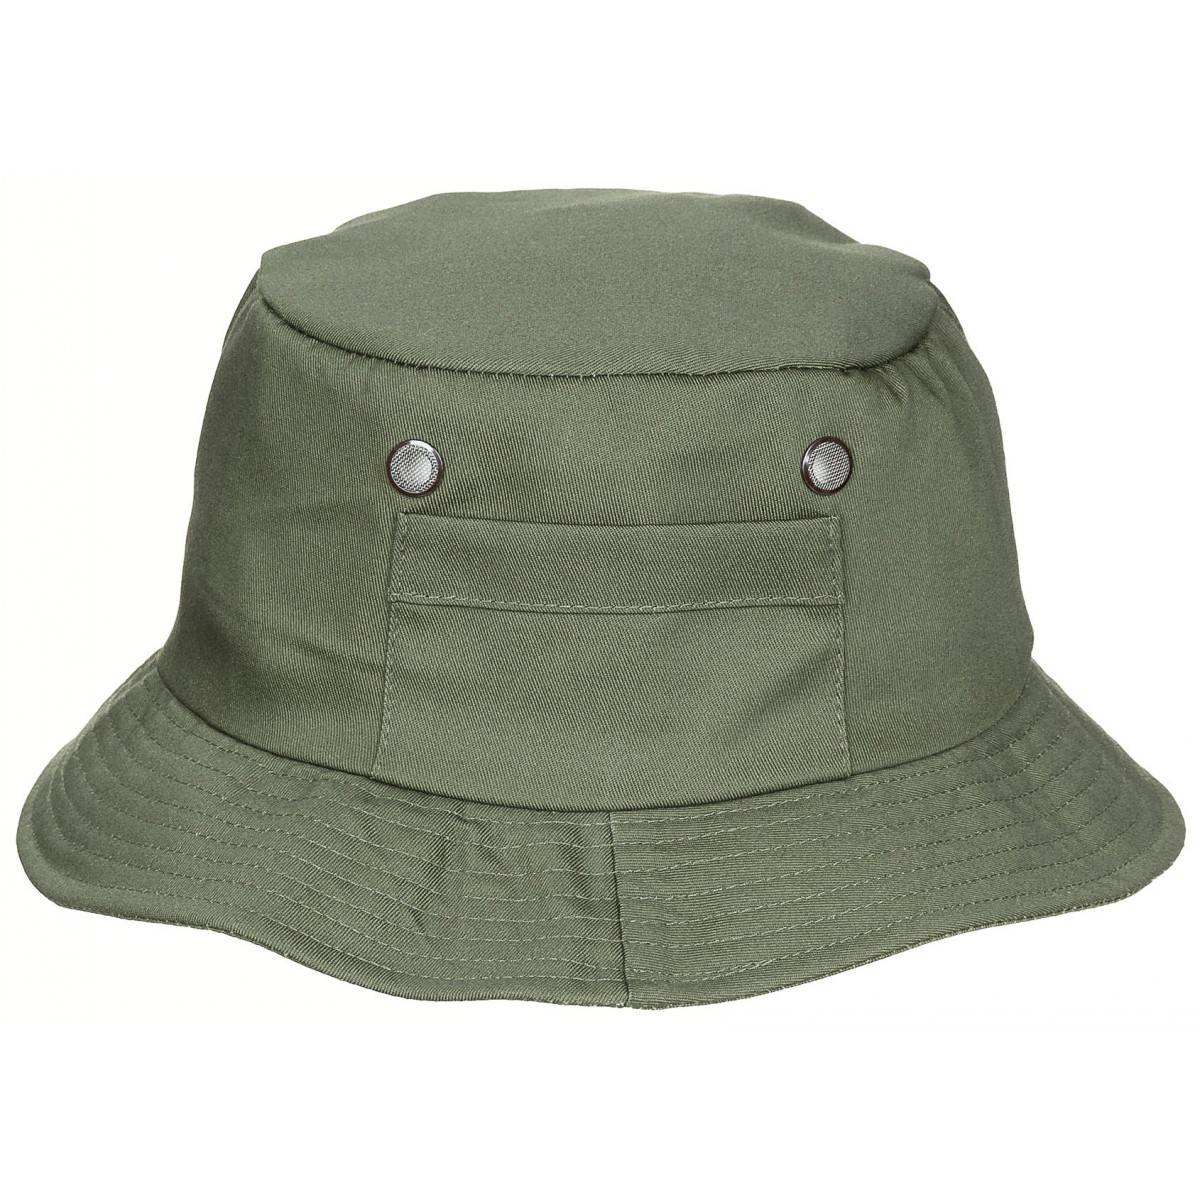 FISHER HAT WITH SIDE POCKET - MFH® - OD GREEN